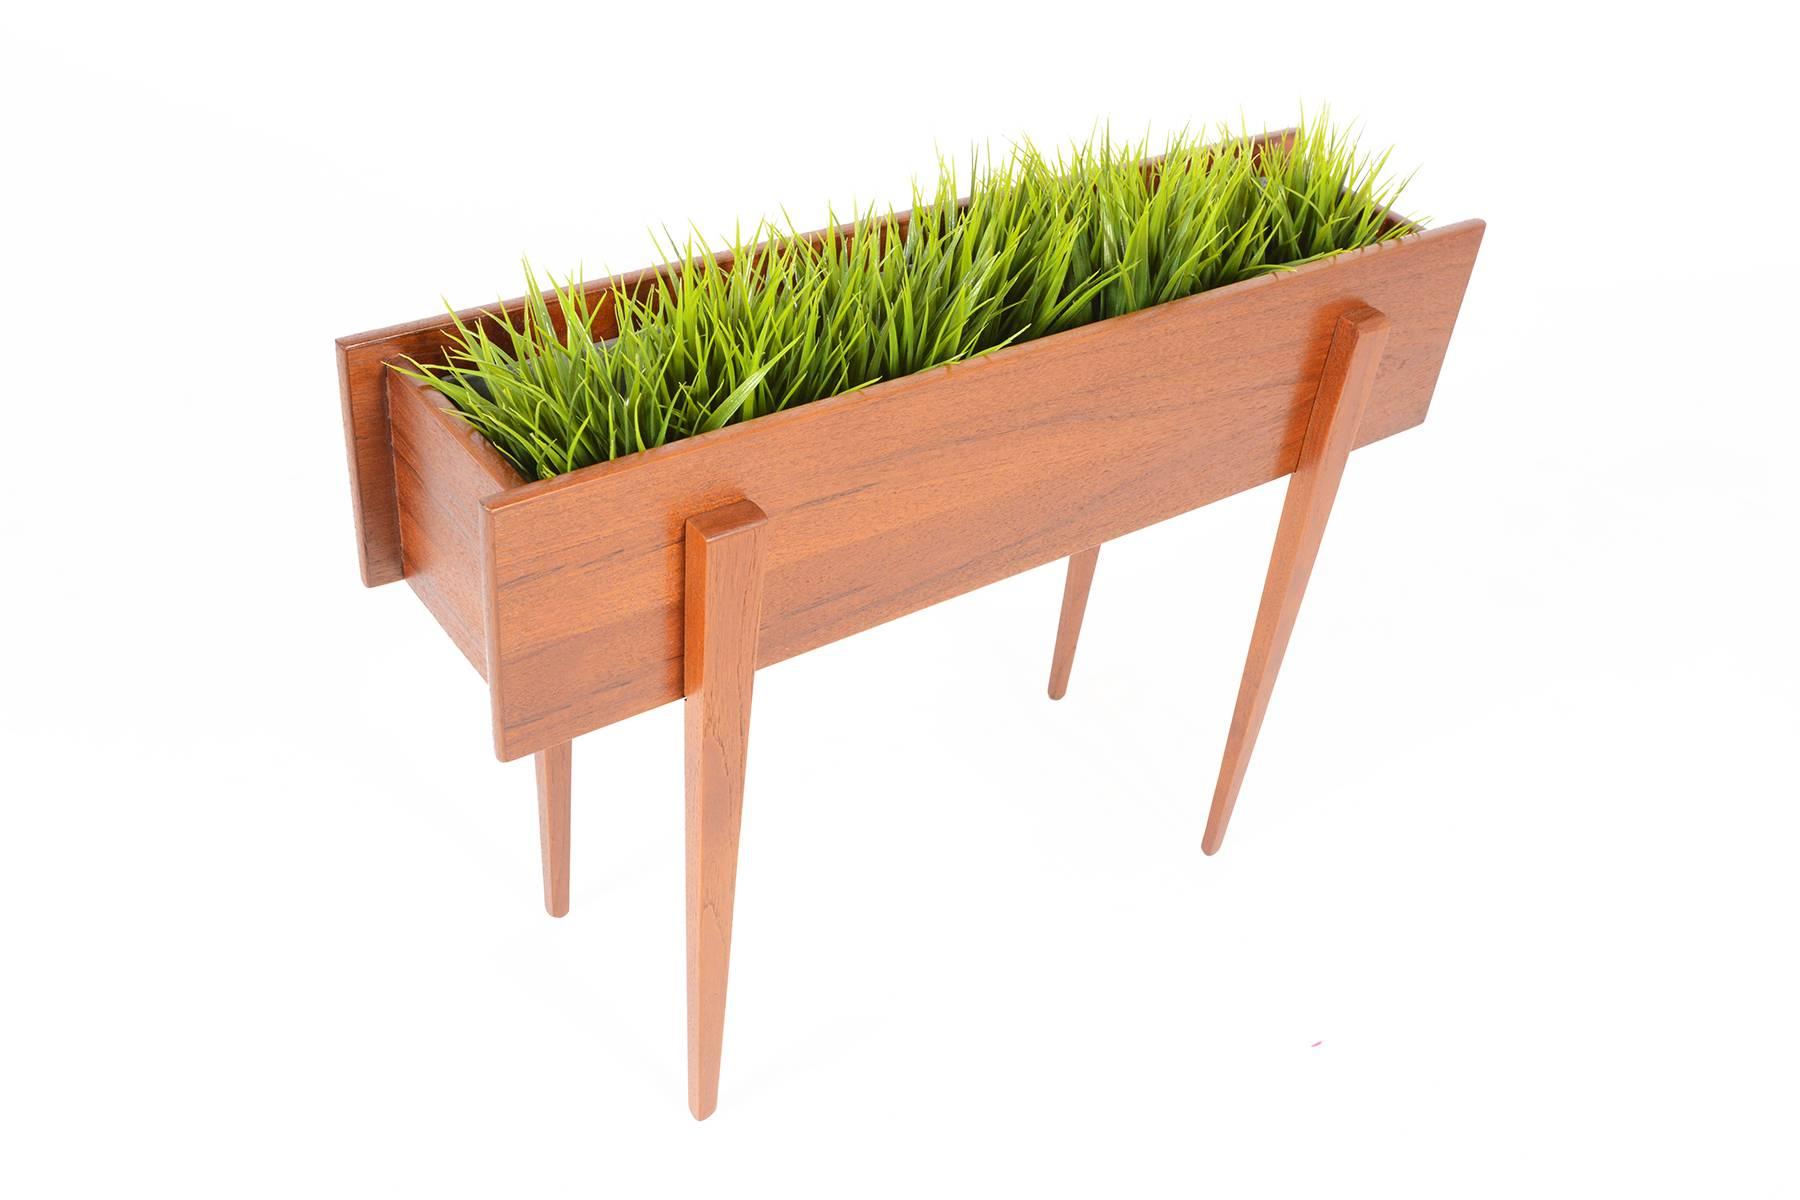 Make your other houseplants jealous of what you display in this amazing Danish modern atomic mid century teak planter box. Exposed legs and angular joinery make this planter a stunner from every angle. A metal liner is removable for cleaning.